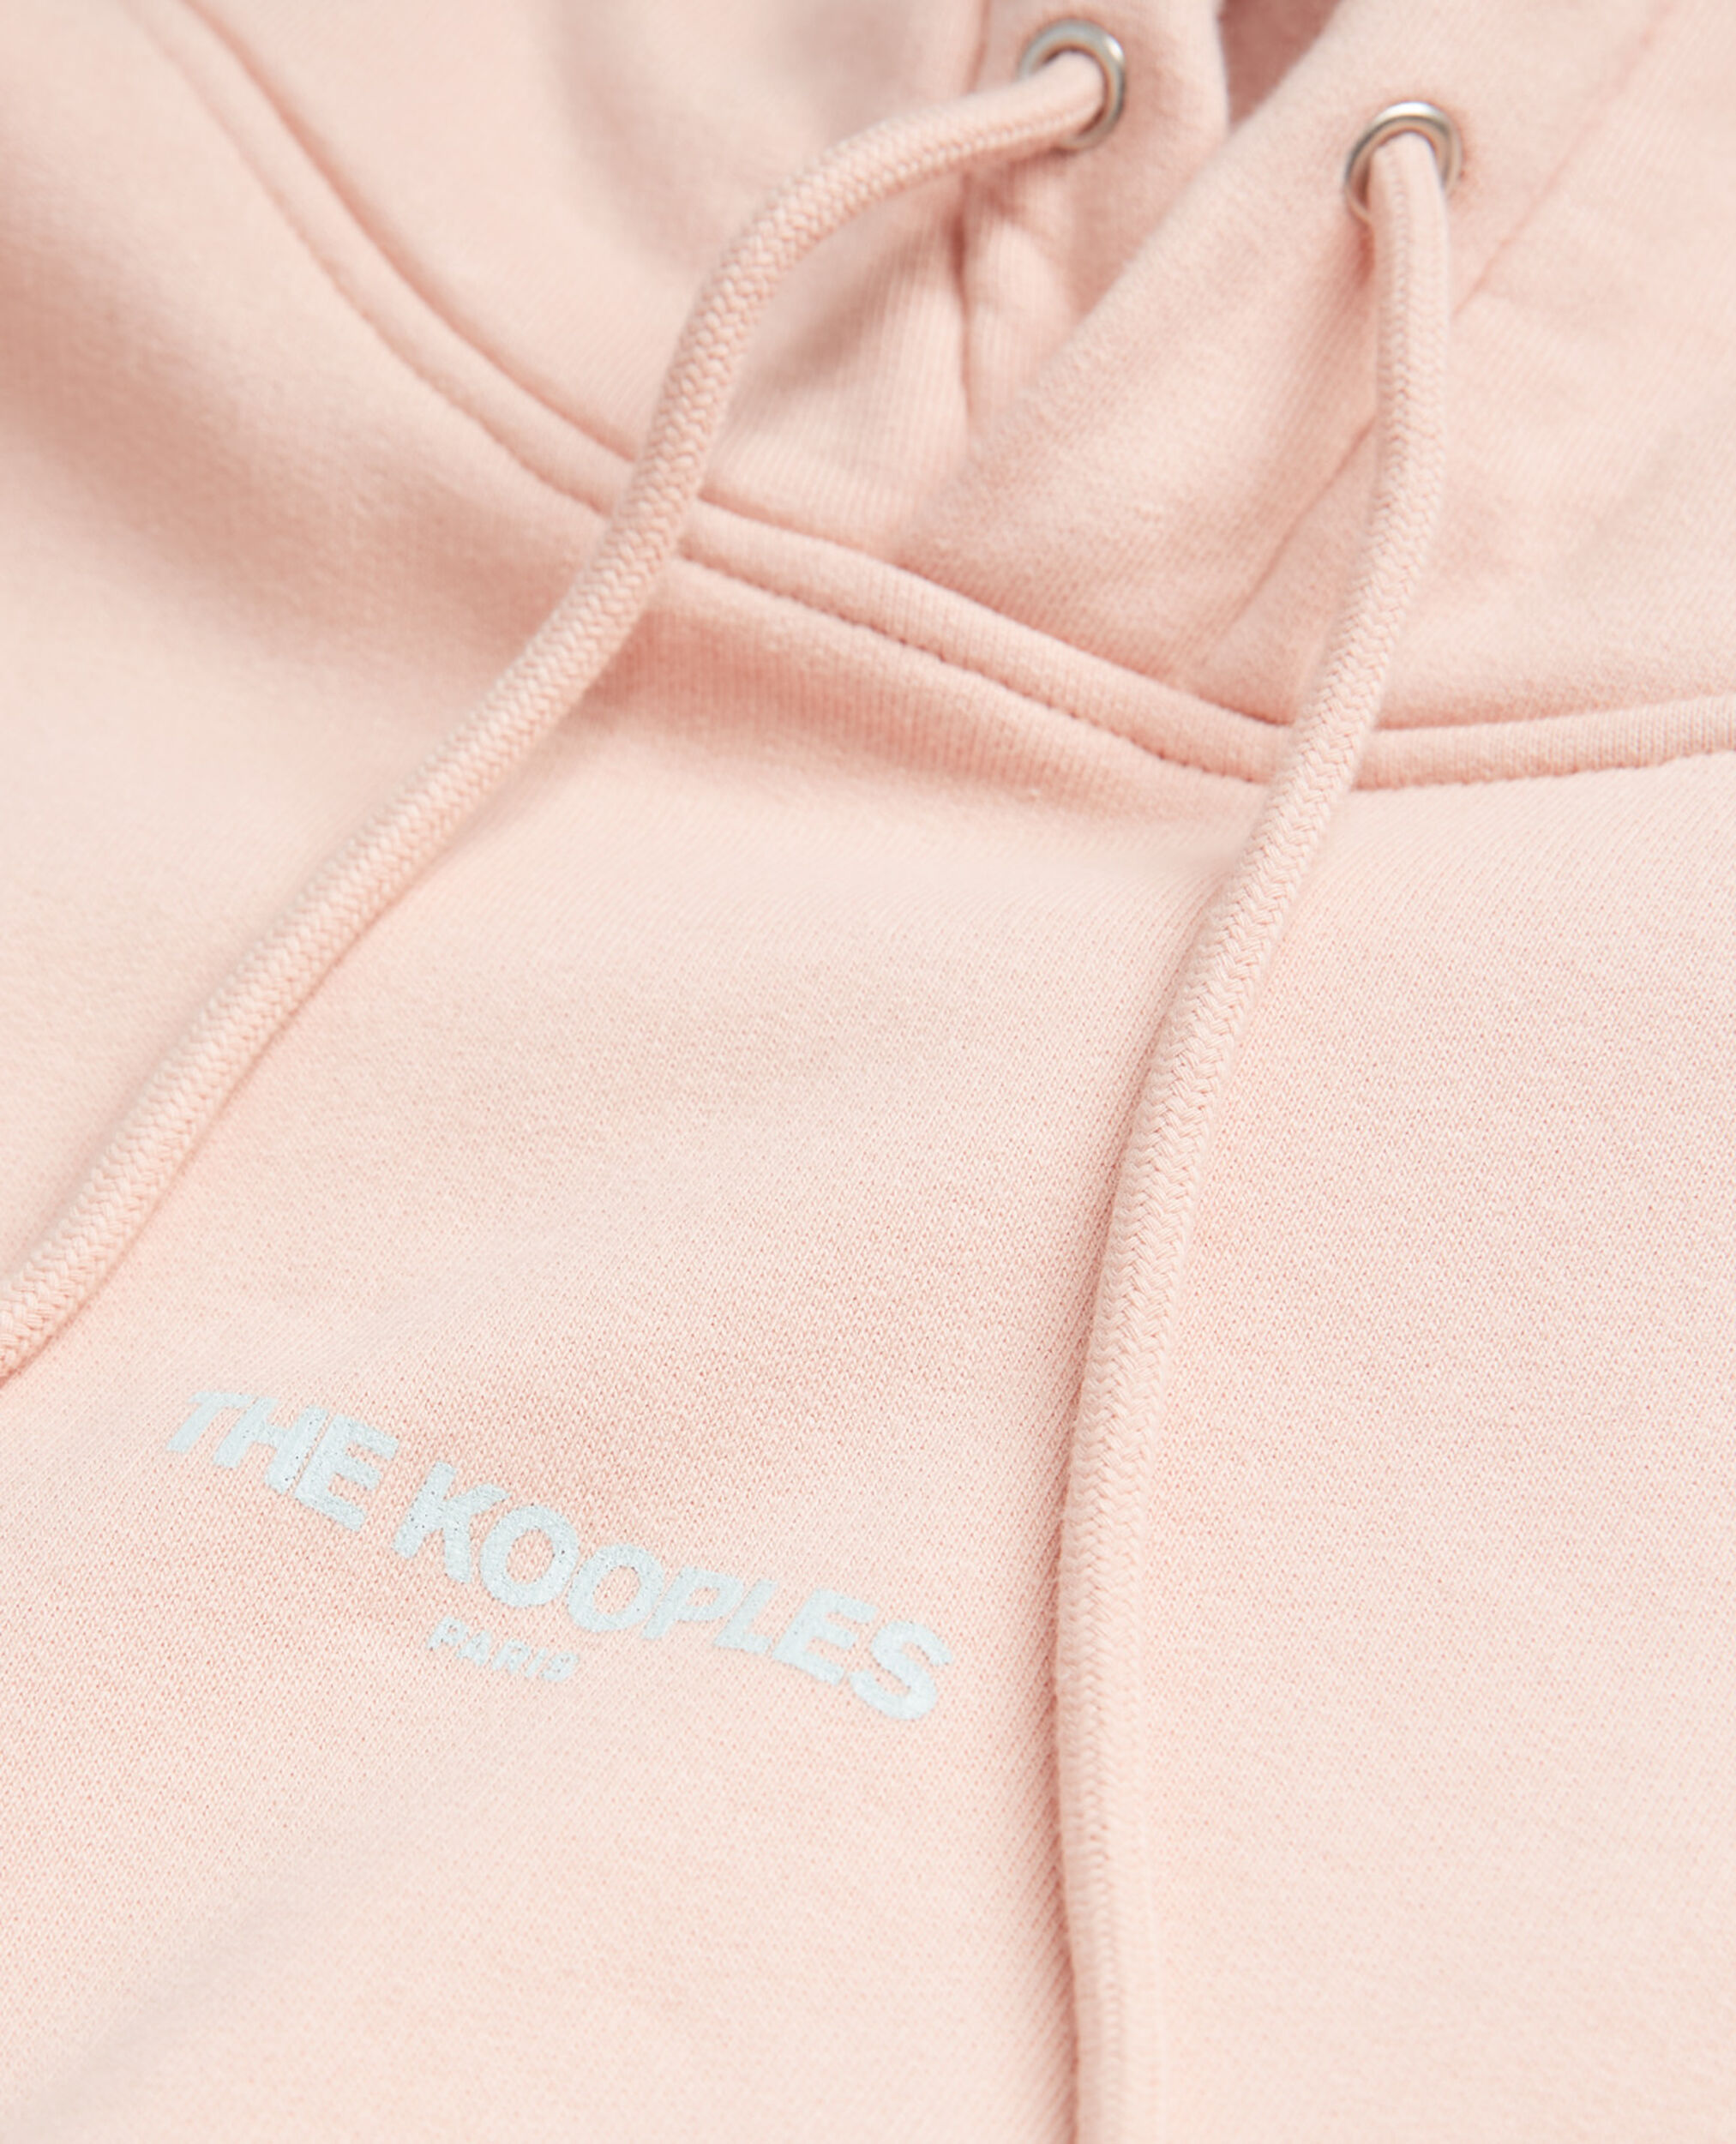 Sweat rose clair capuche poche kangourou, PINK, hi-res image number null